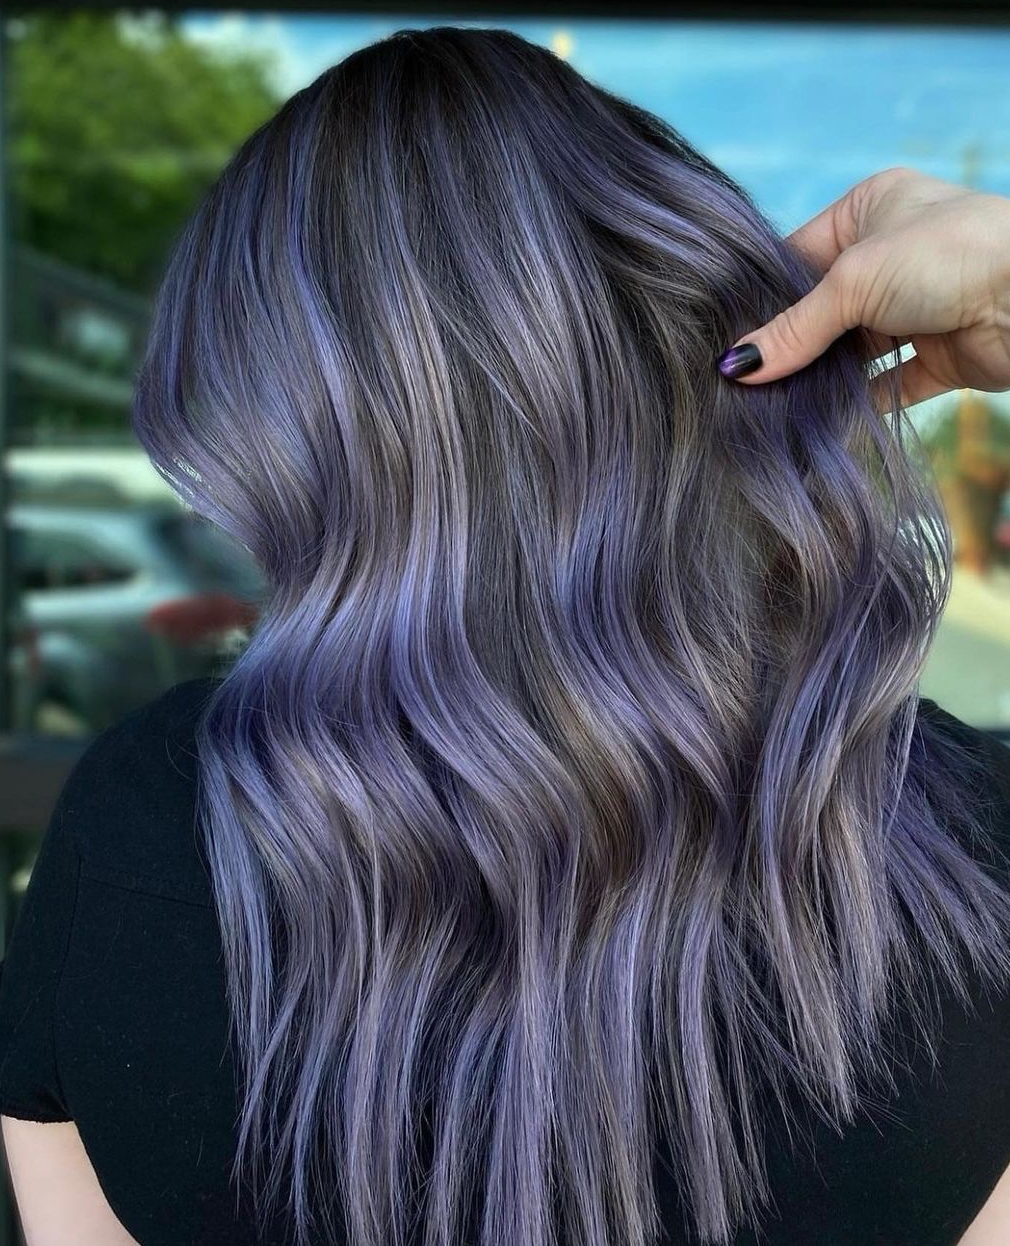 Silver Hair with Purple Highlights on Long Hair